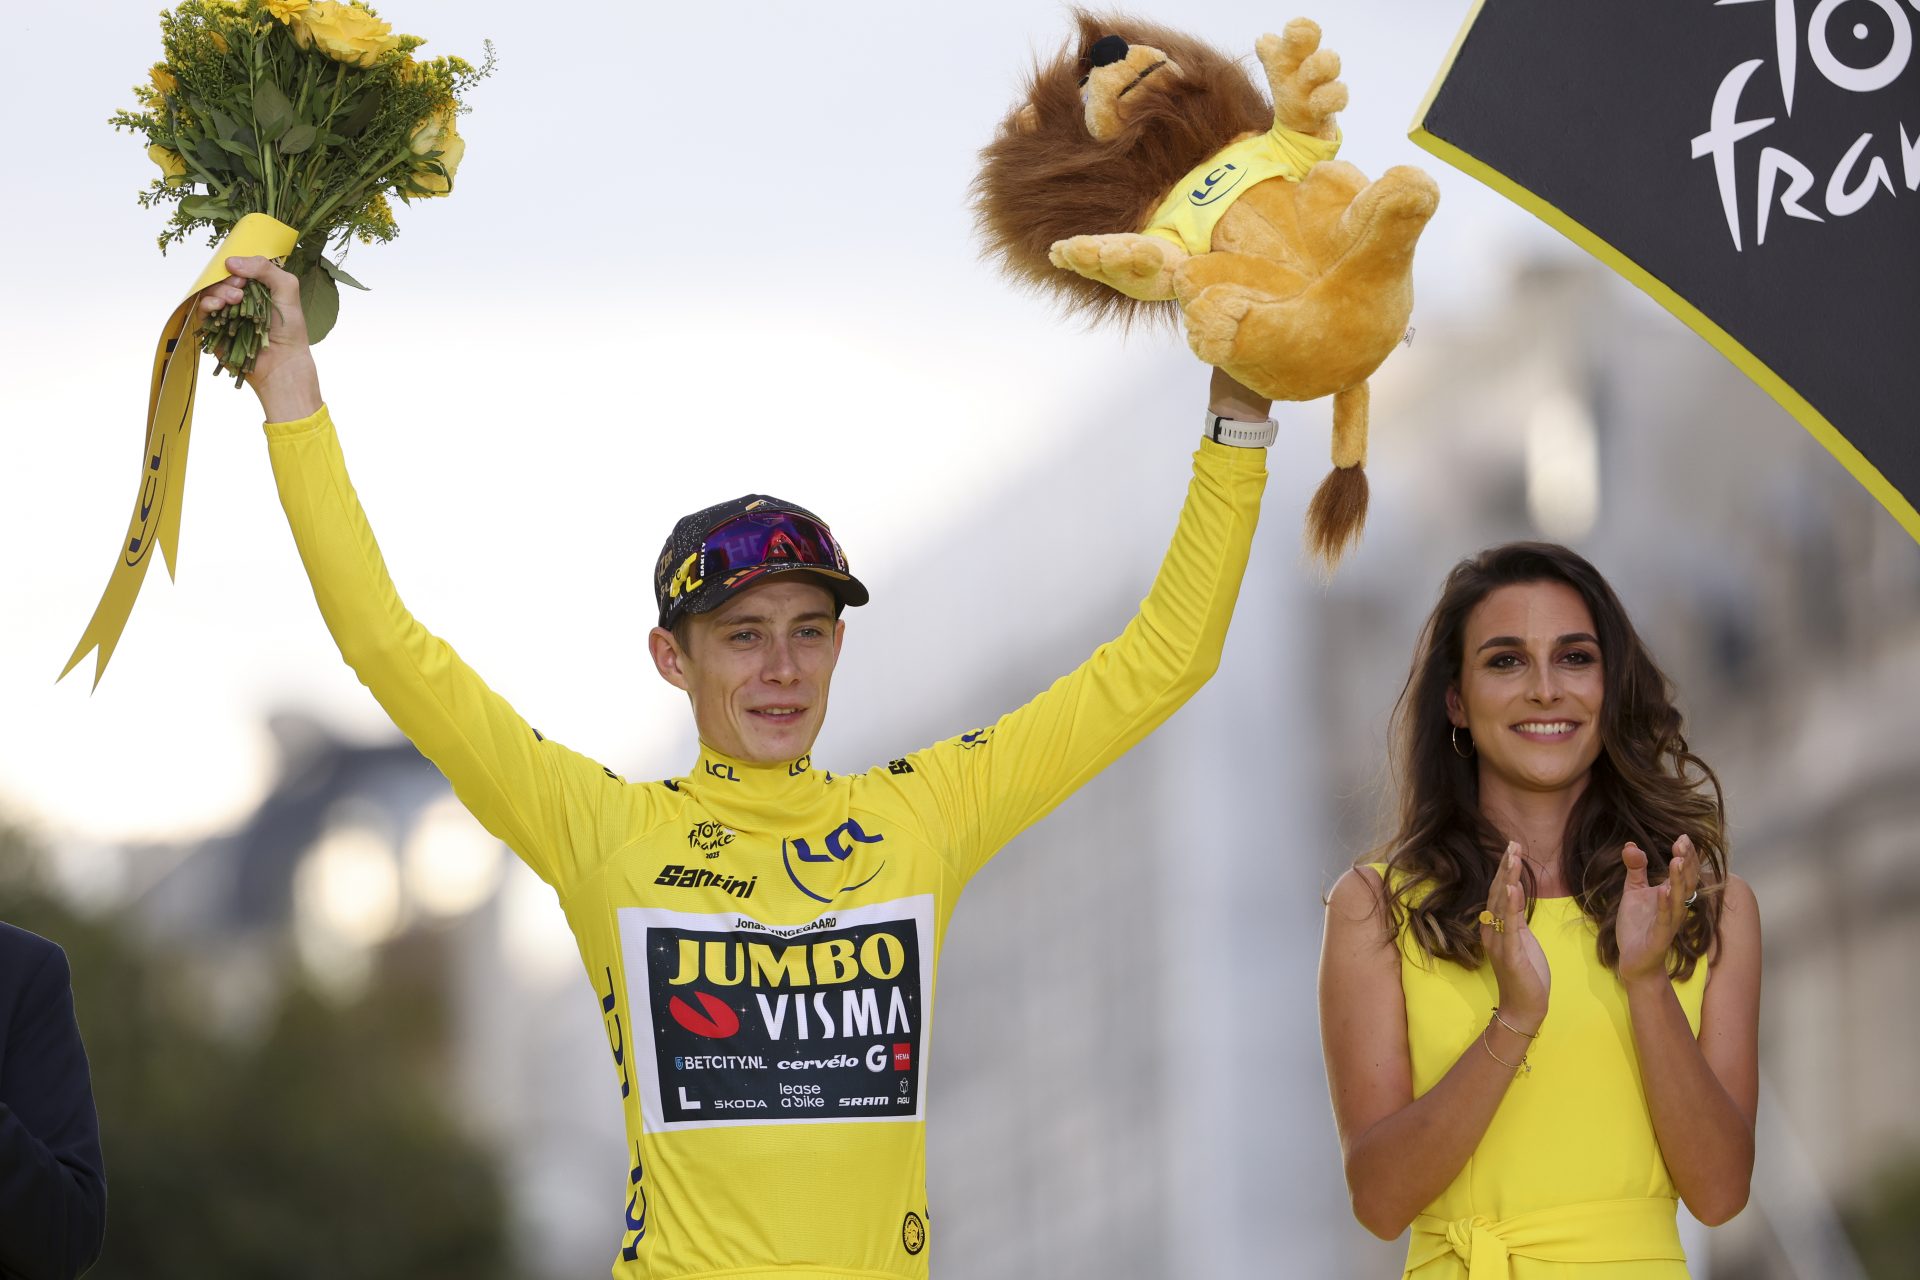 The 8 riders to win more Tour de France titles than Jonas Vingegaard